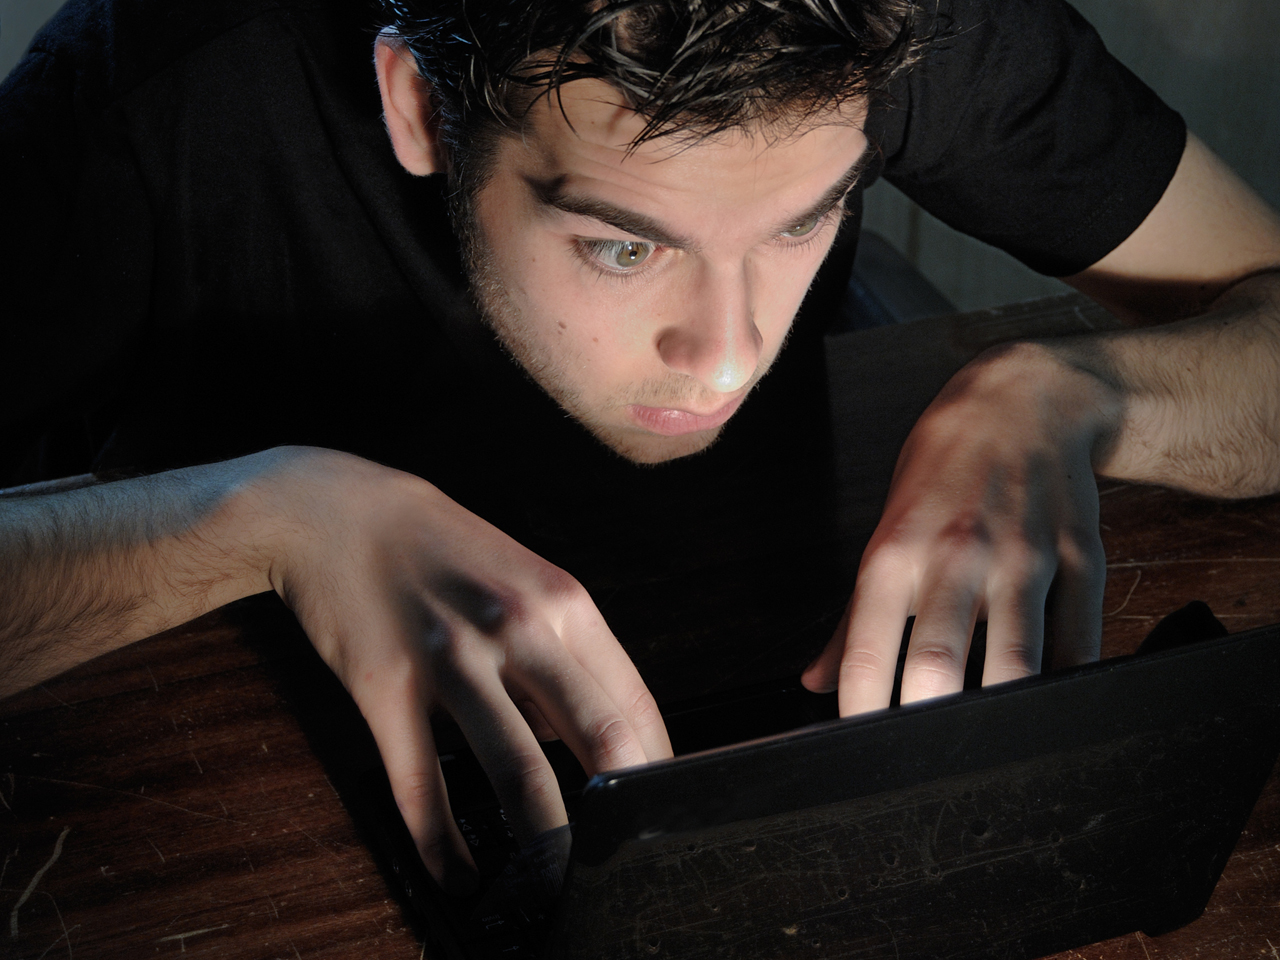 Young man totally absorbed in on-line activity